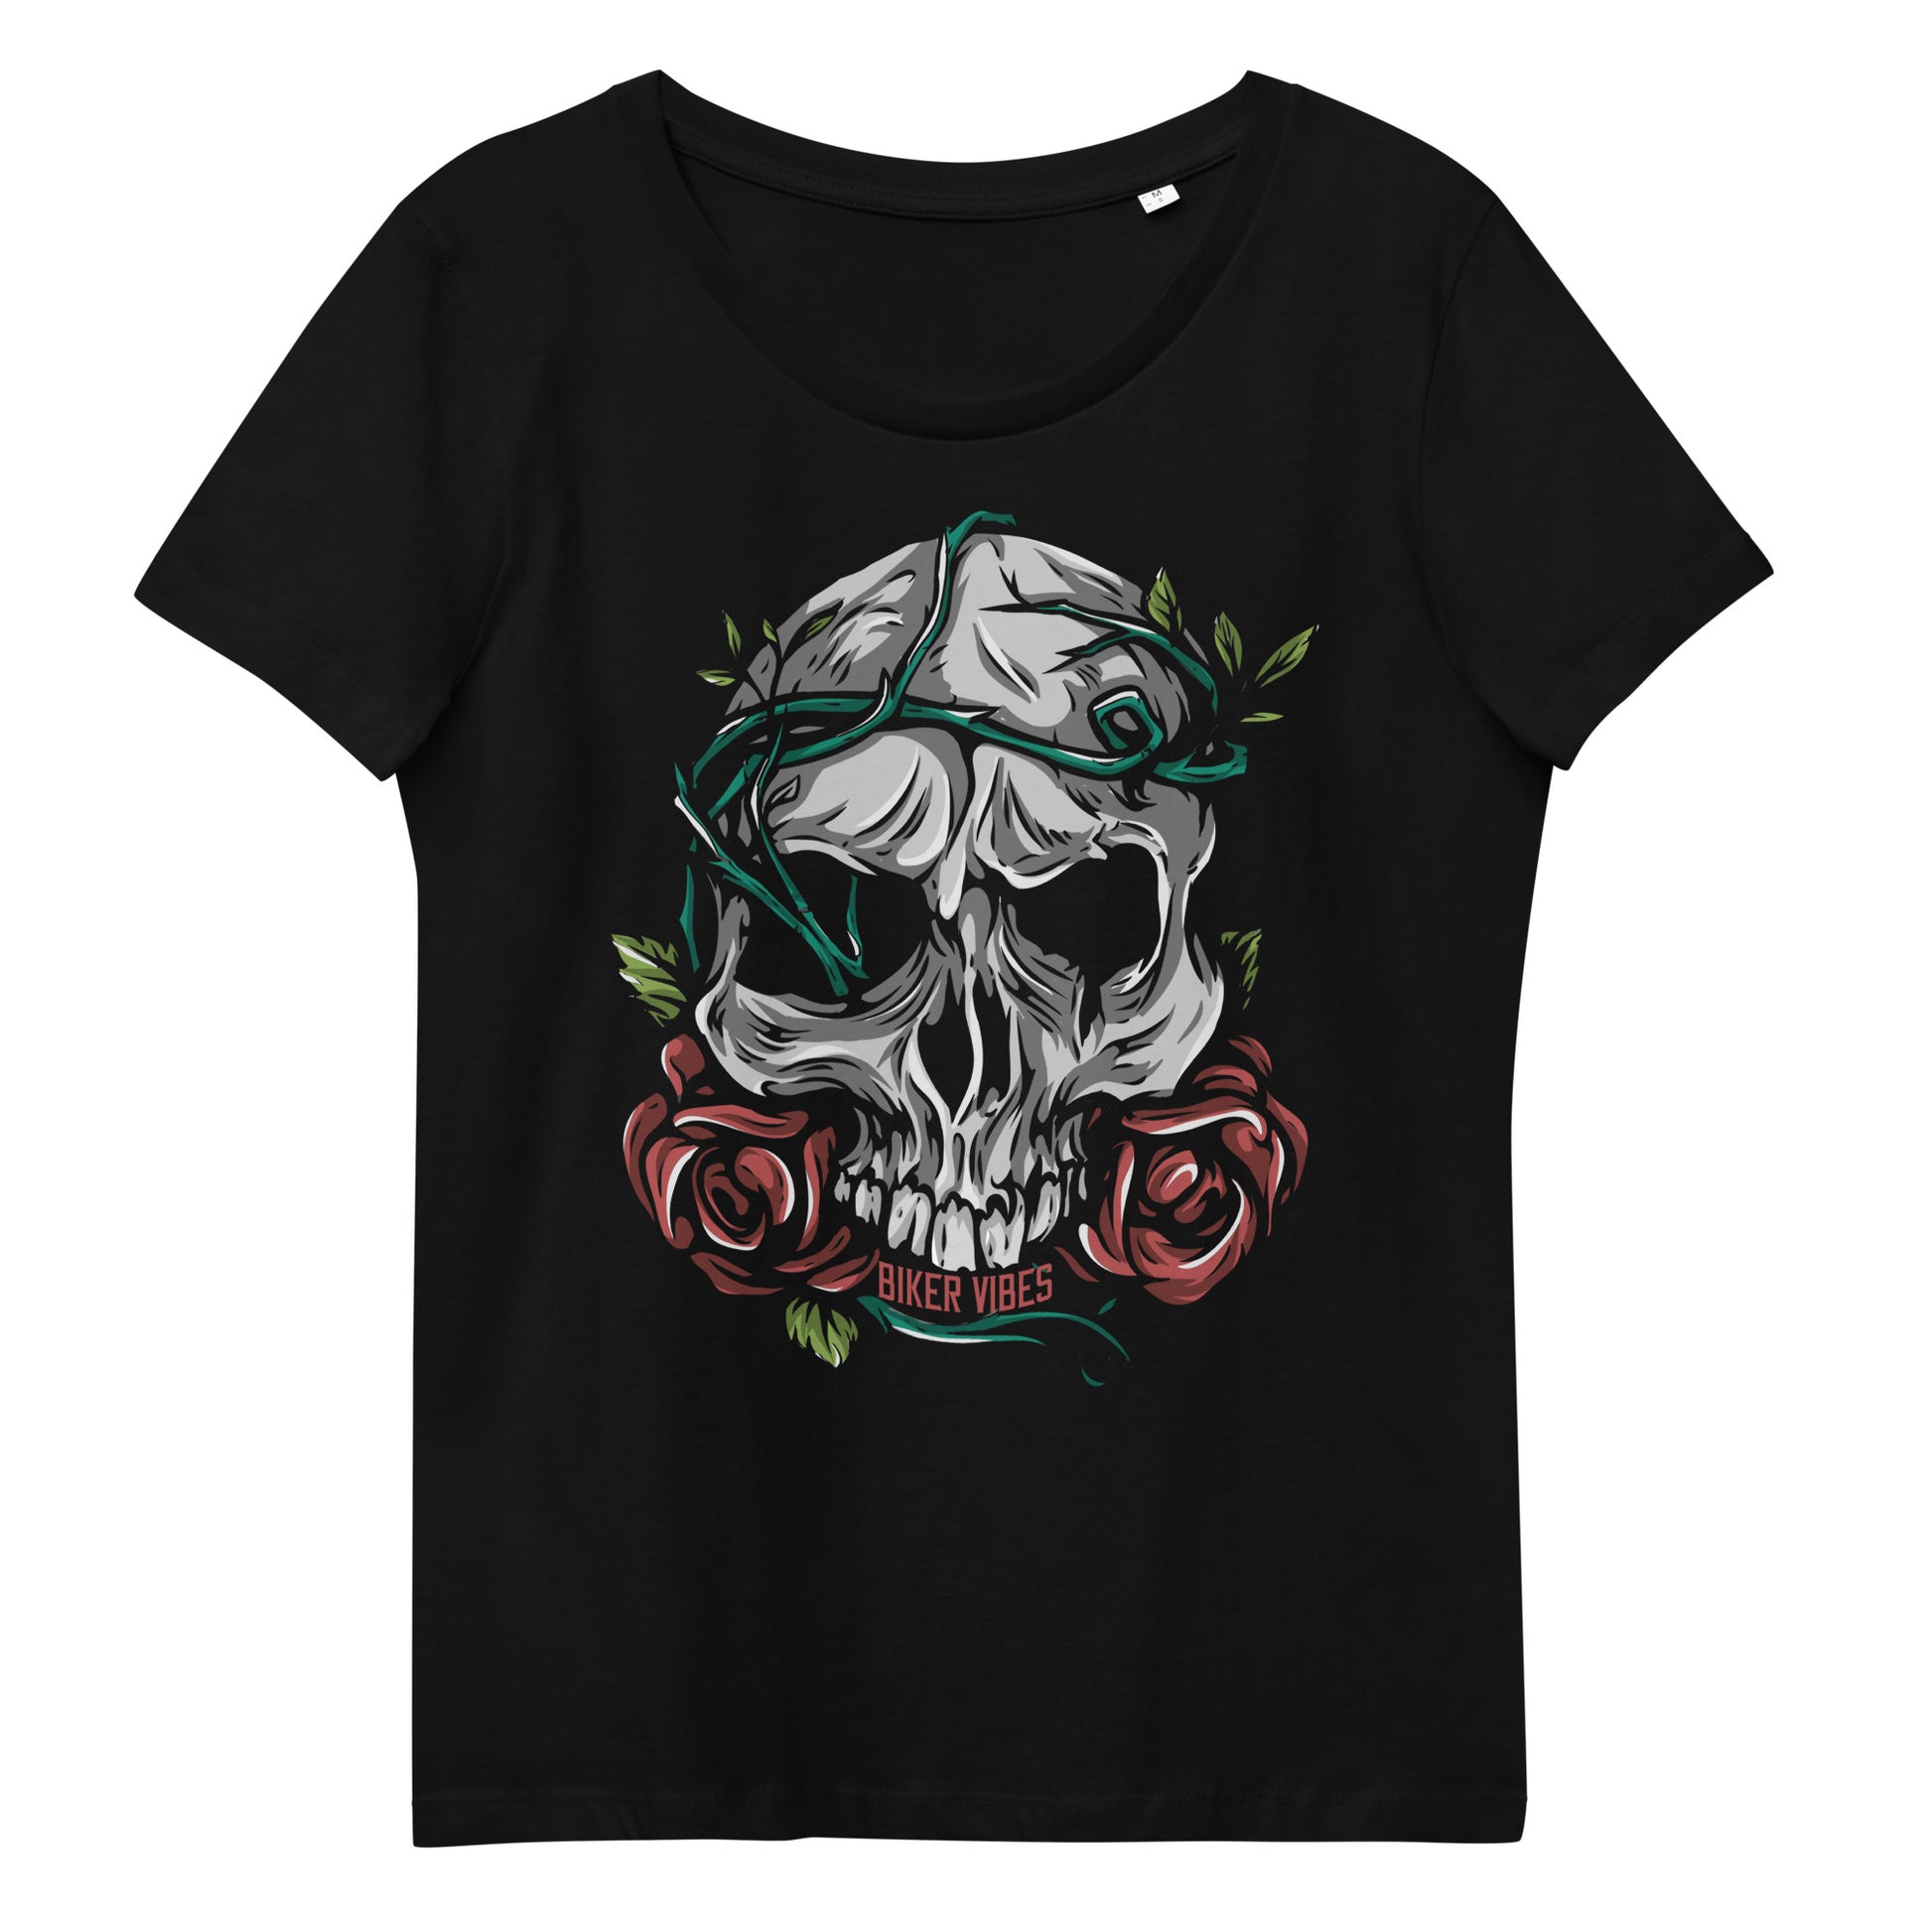 TIME OF VIBES - Women's fitted eco tee FLOWERSKULL (Black) - €32.00